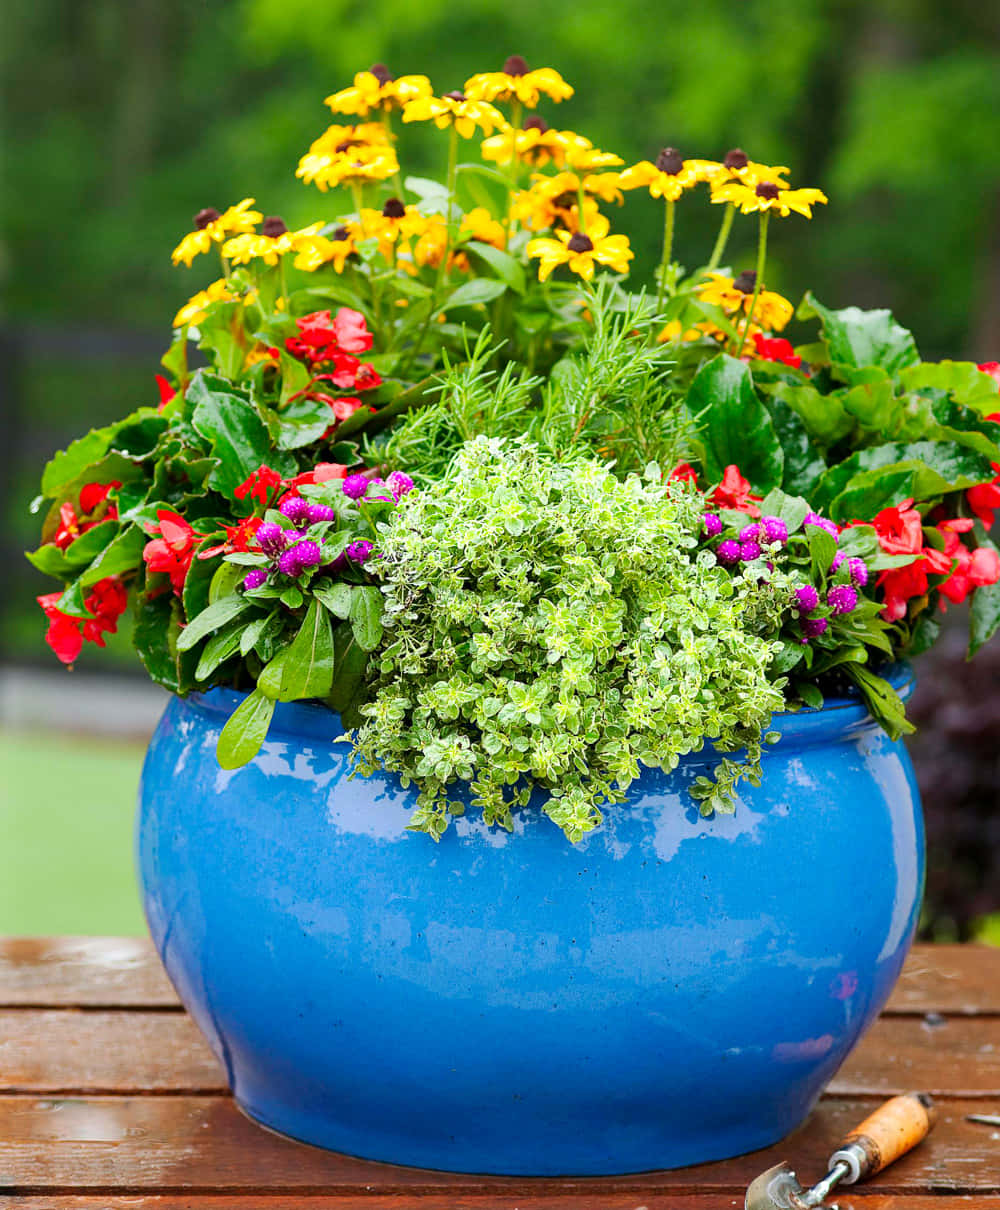 A Blue Pot With Flowers